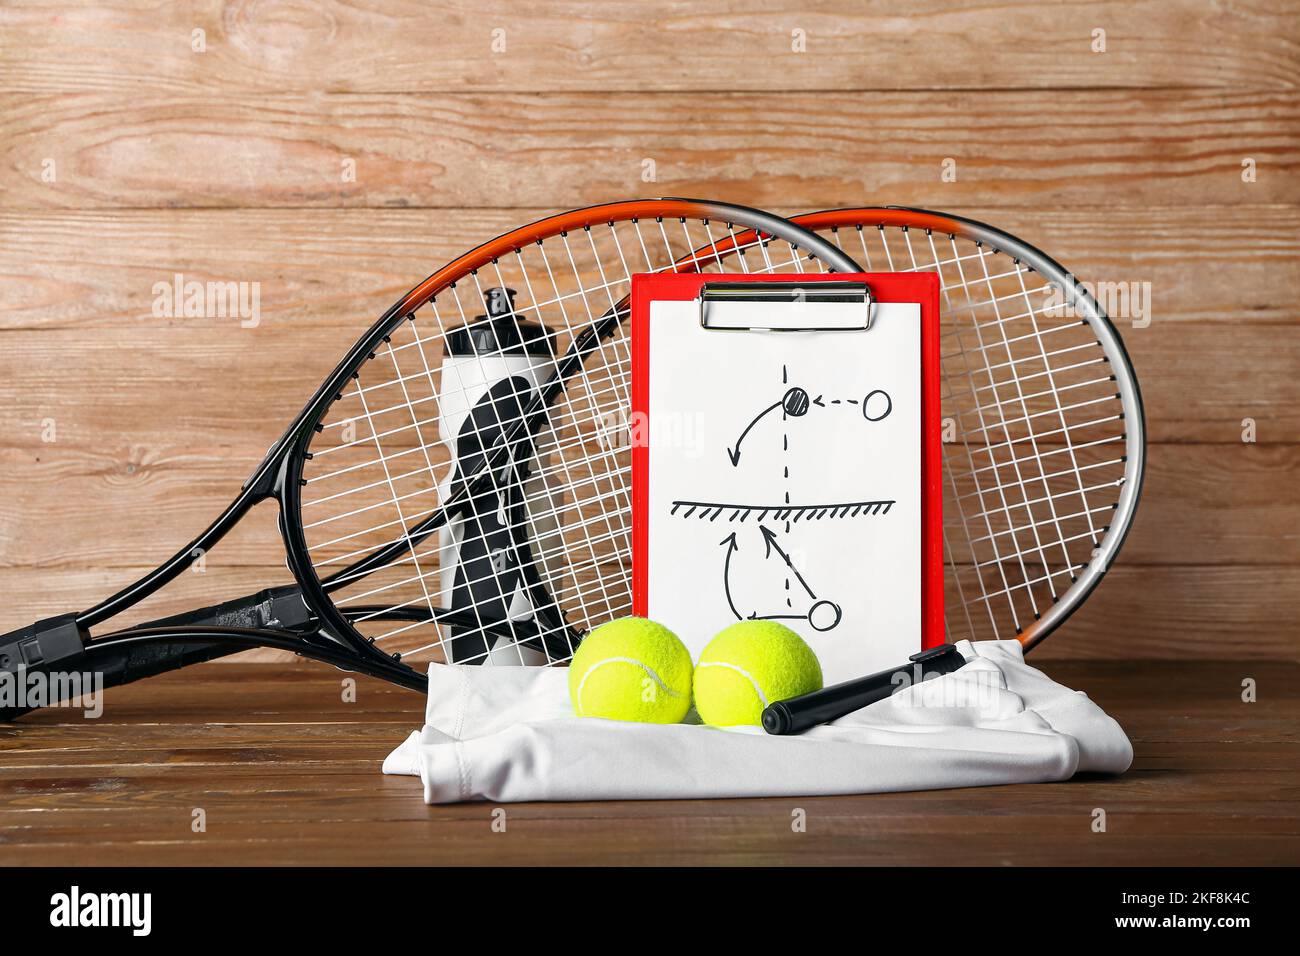 Clipboard with drawn scheme of tennis game, rackets, balls, skirt and bottle on wooden background Stock Photo